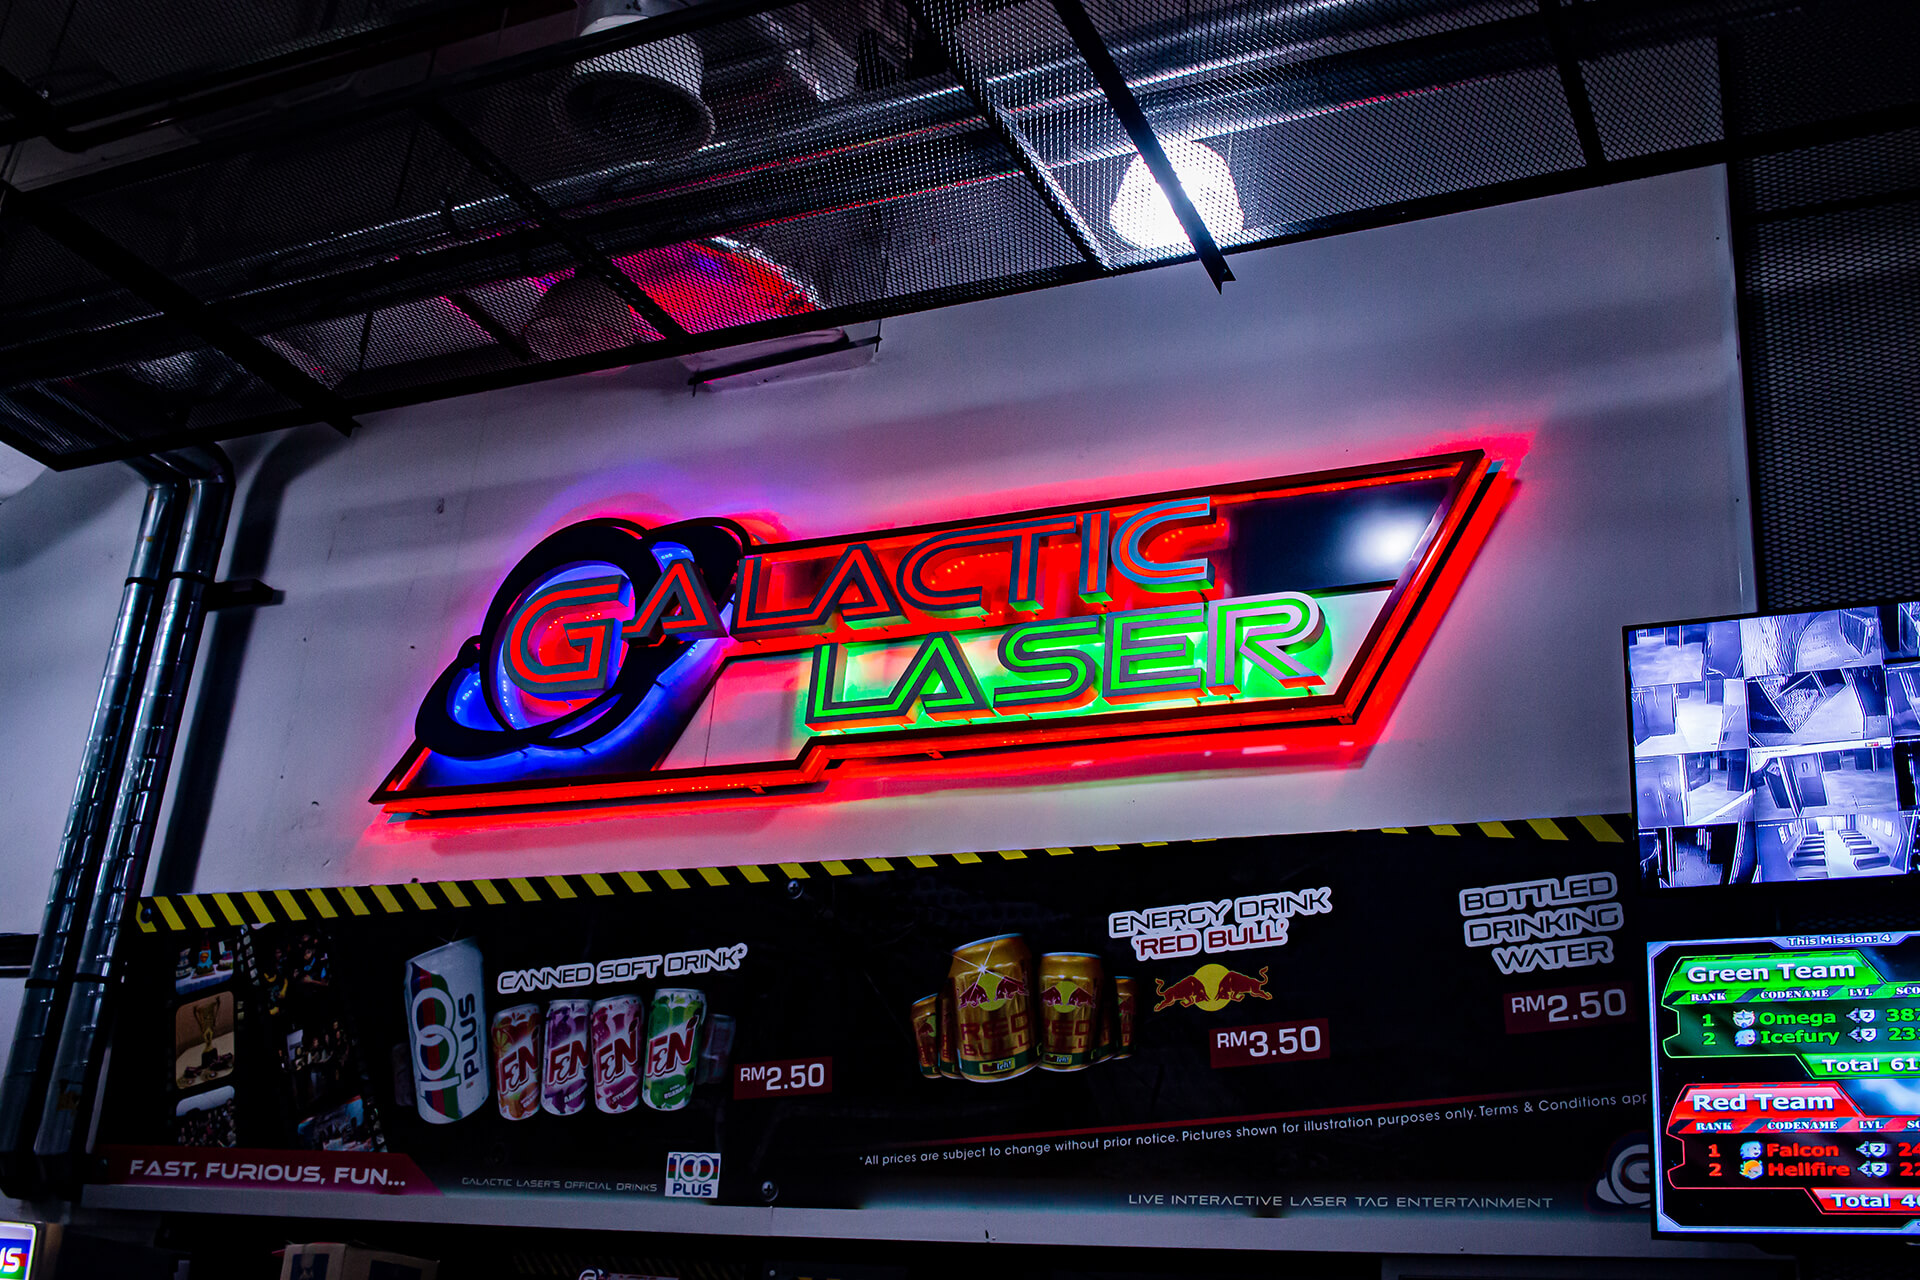 Embrace your inner cyclops at Galactic Laser, Sunway Pyramid